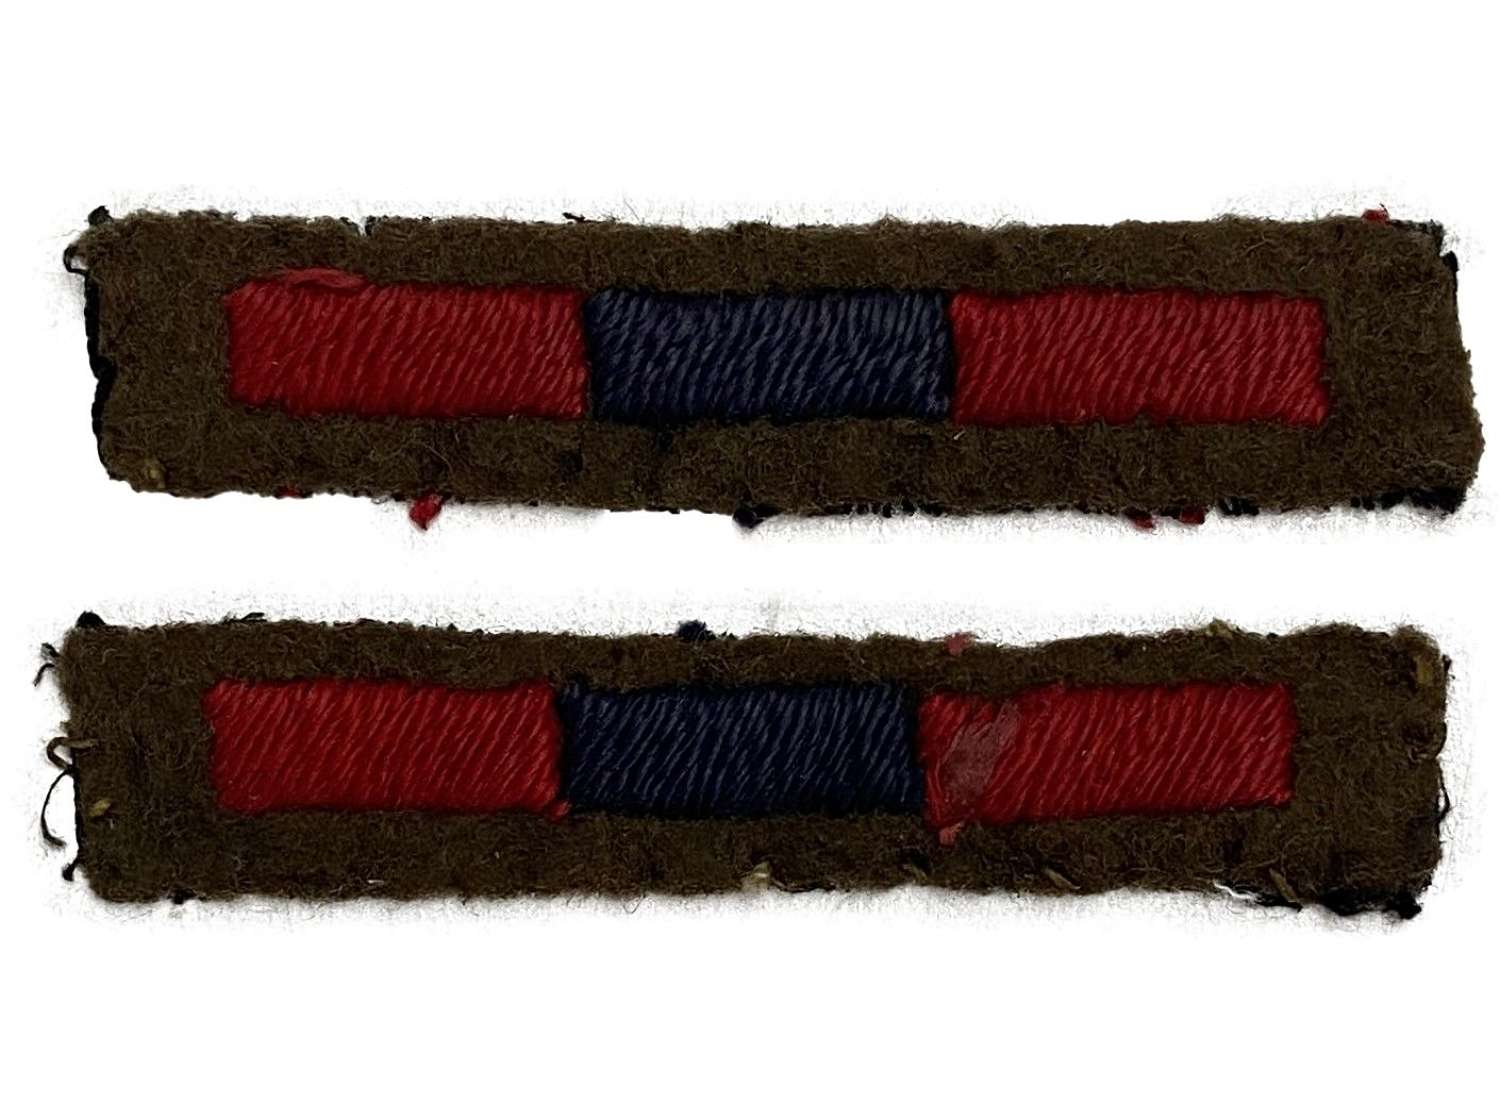 WW2 BRITISH ROYAL ARMY MEDICAL CORPS ARM BRANCH OF SERVICE STRIPES COTTON 